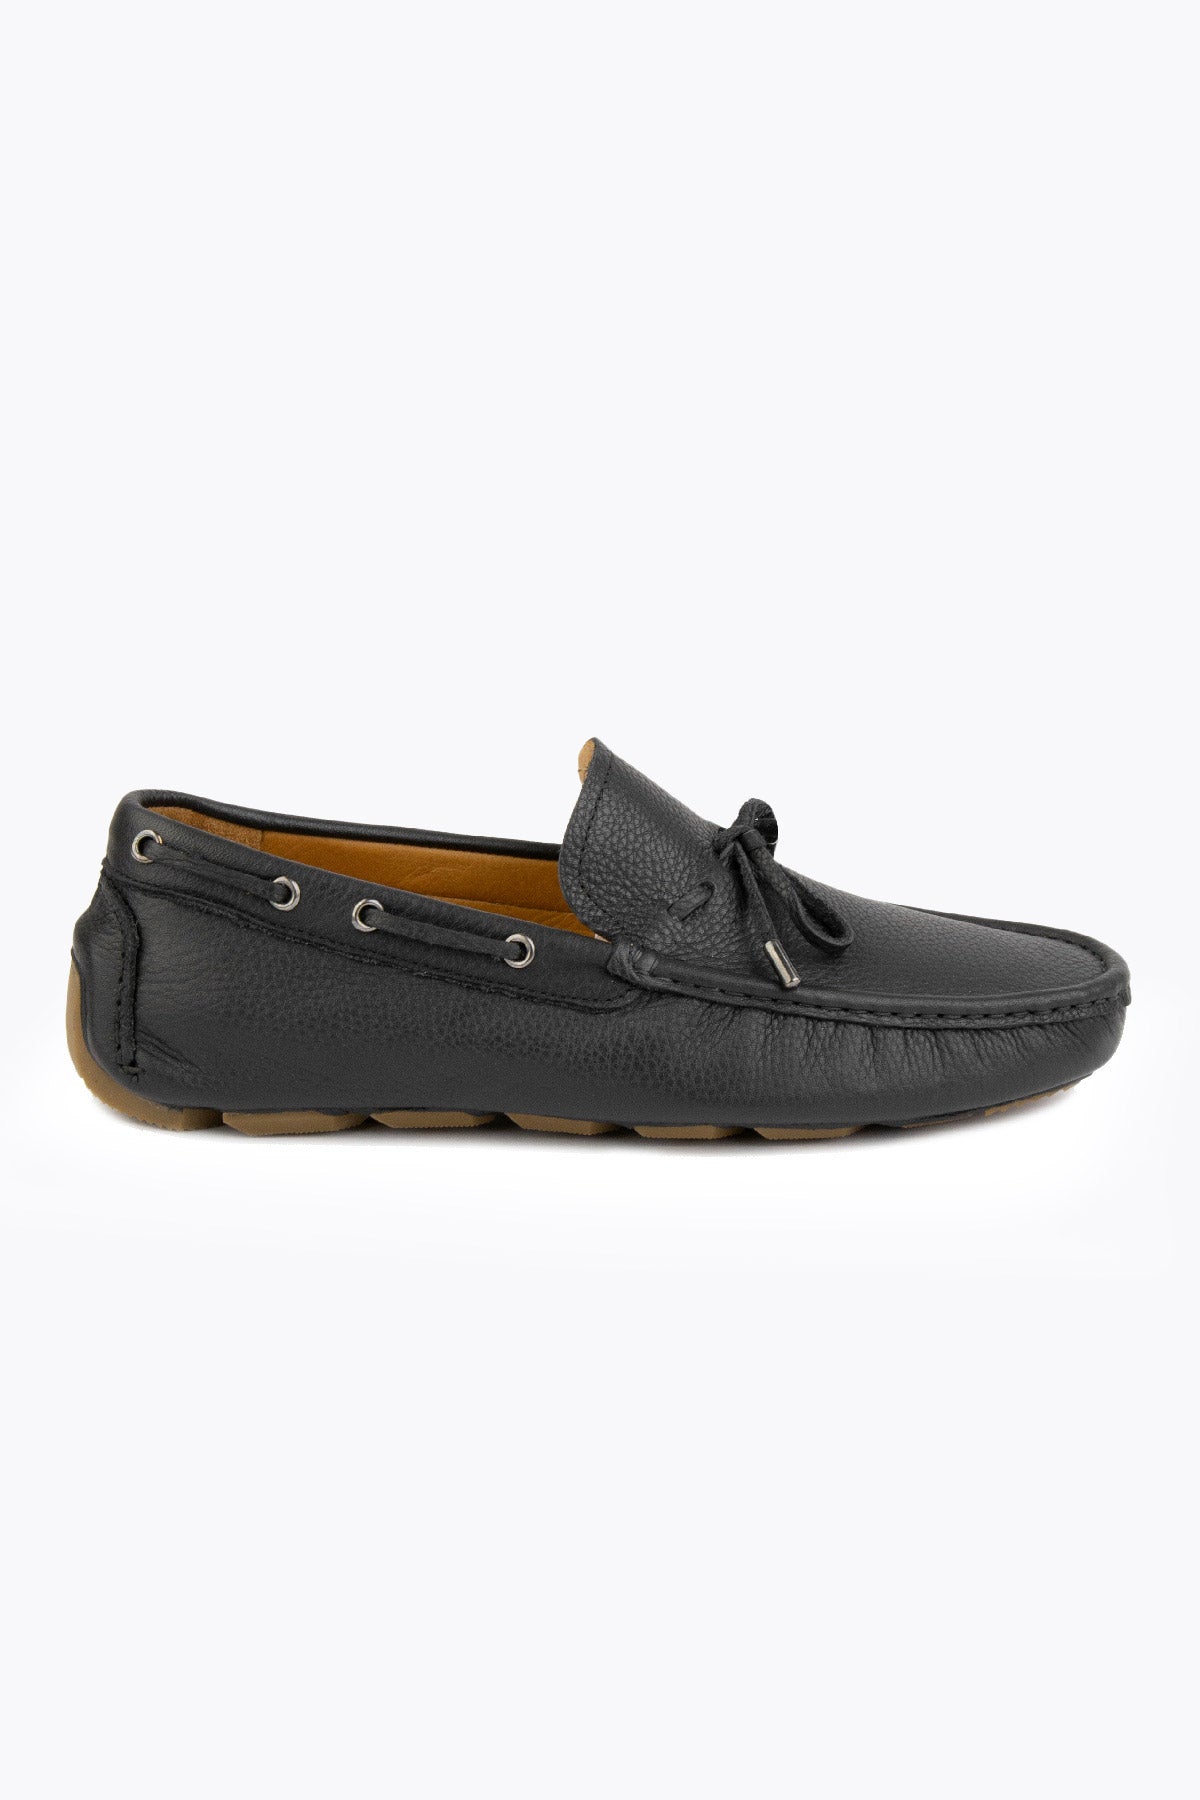 Pegia Brady Leather Men's Loafers